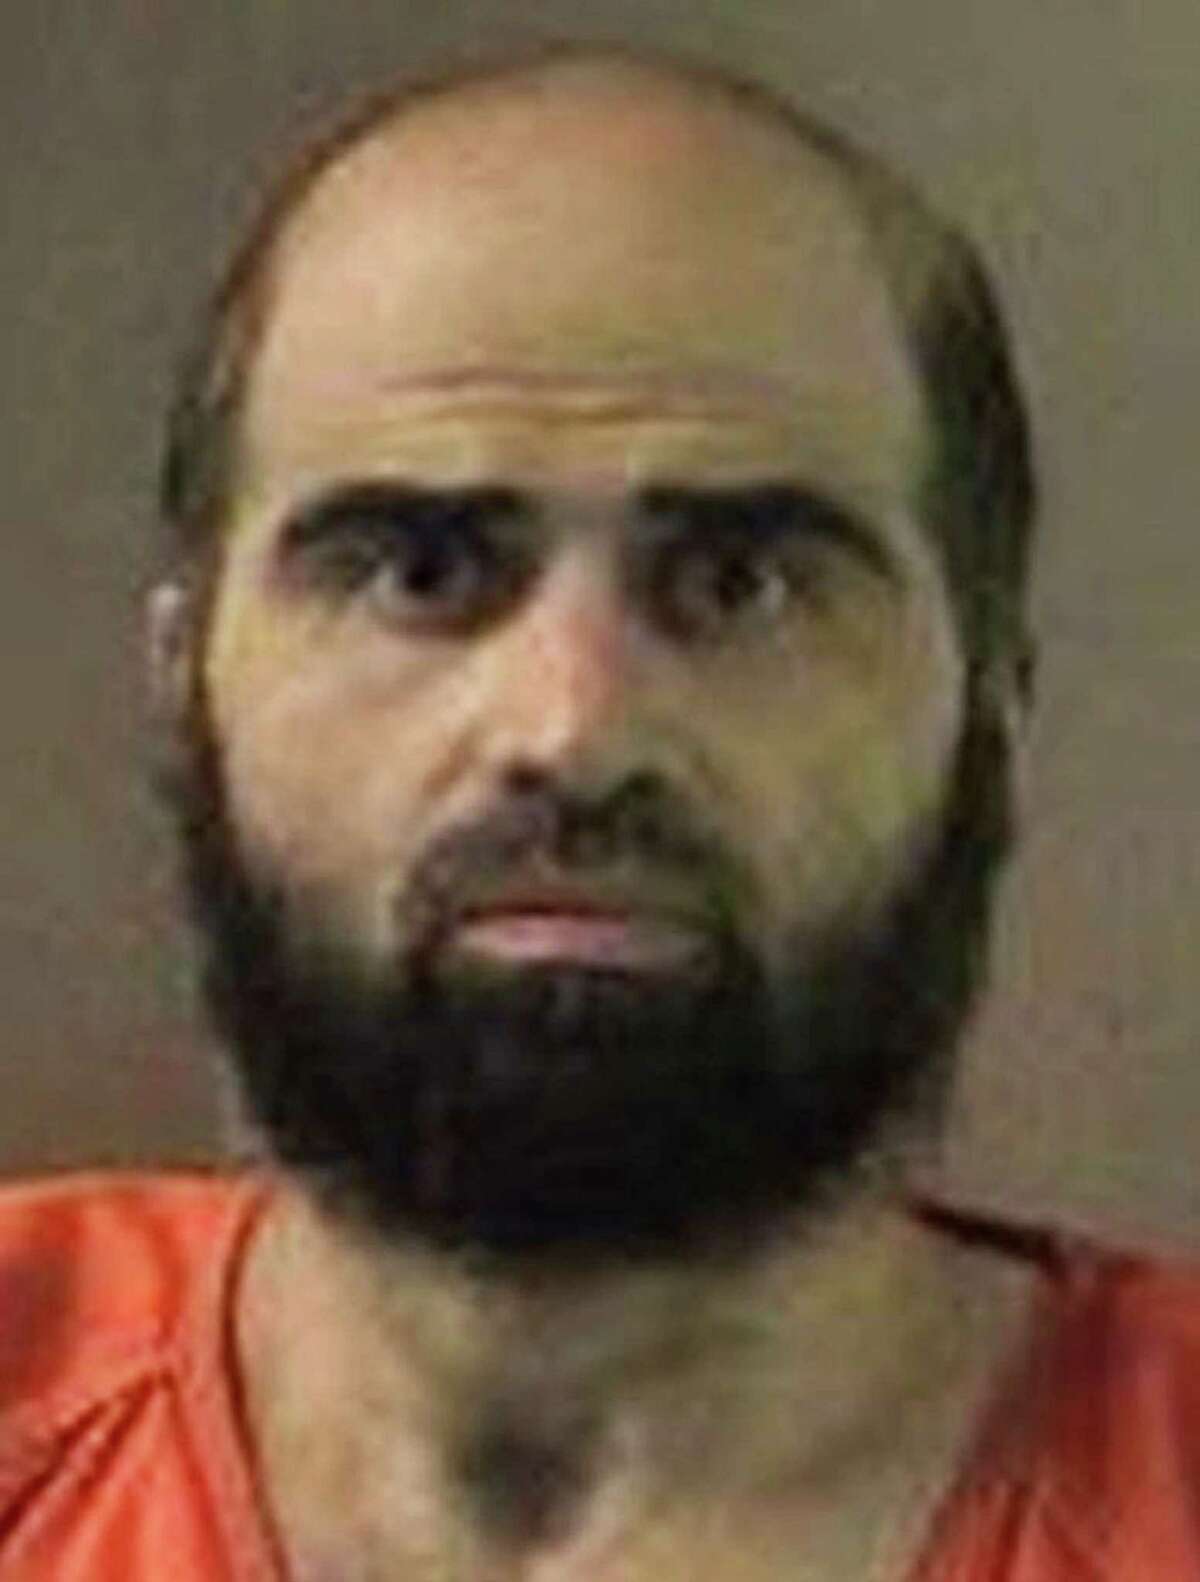 Nidal Hasan's rampage in 2009 at Fort Hood left 13 people dead and 32 hurt.